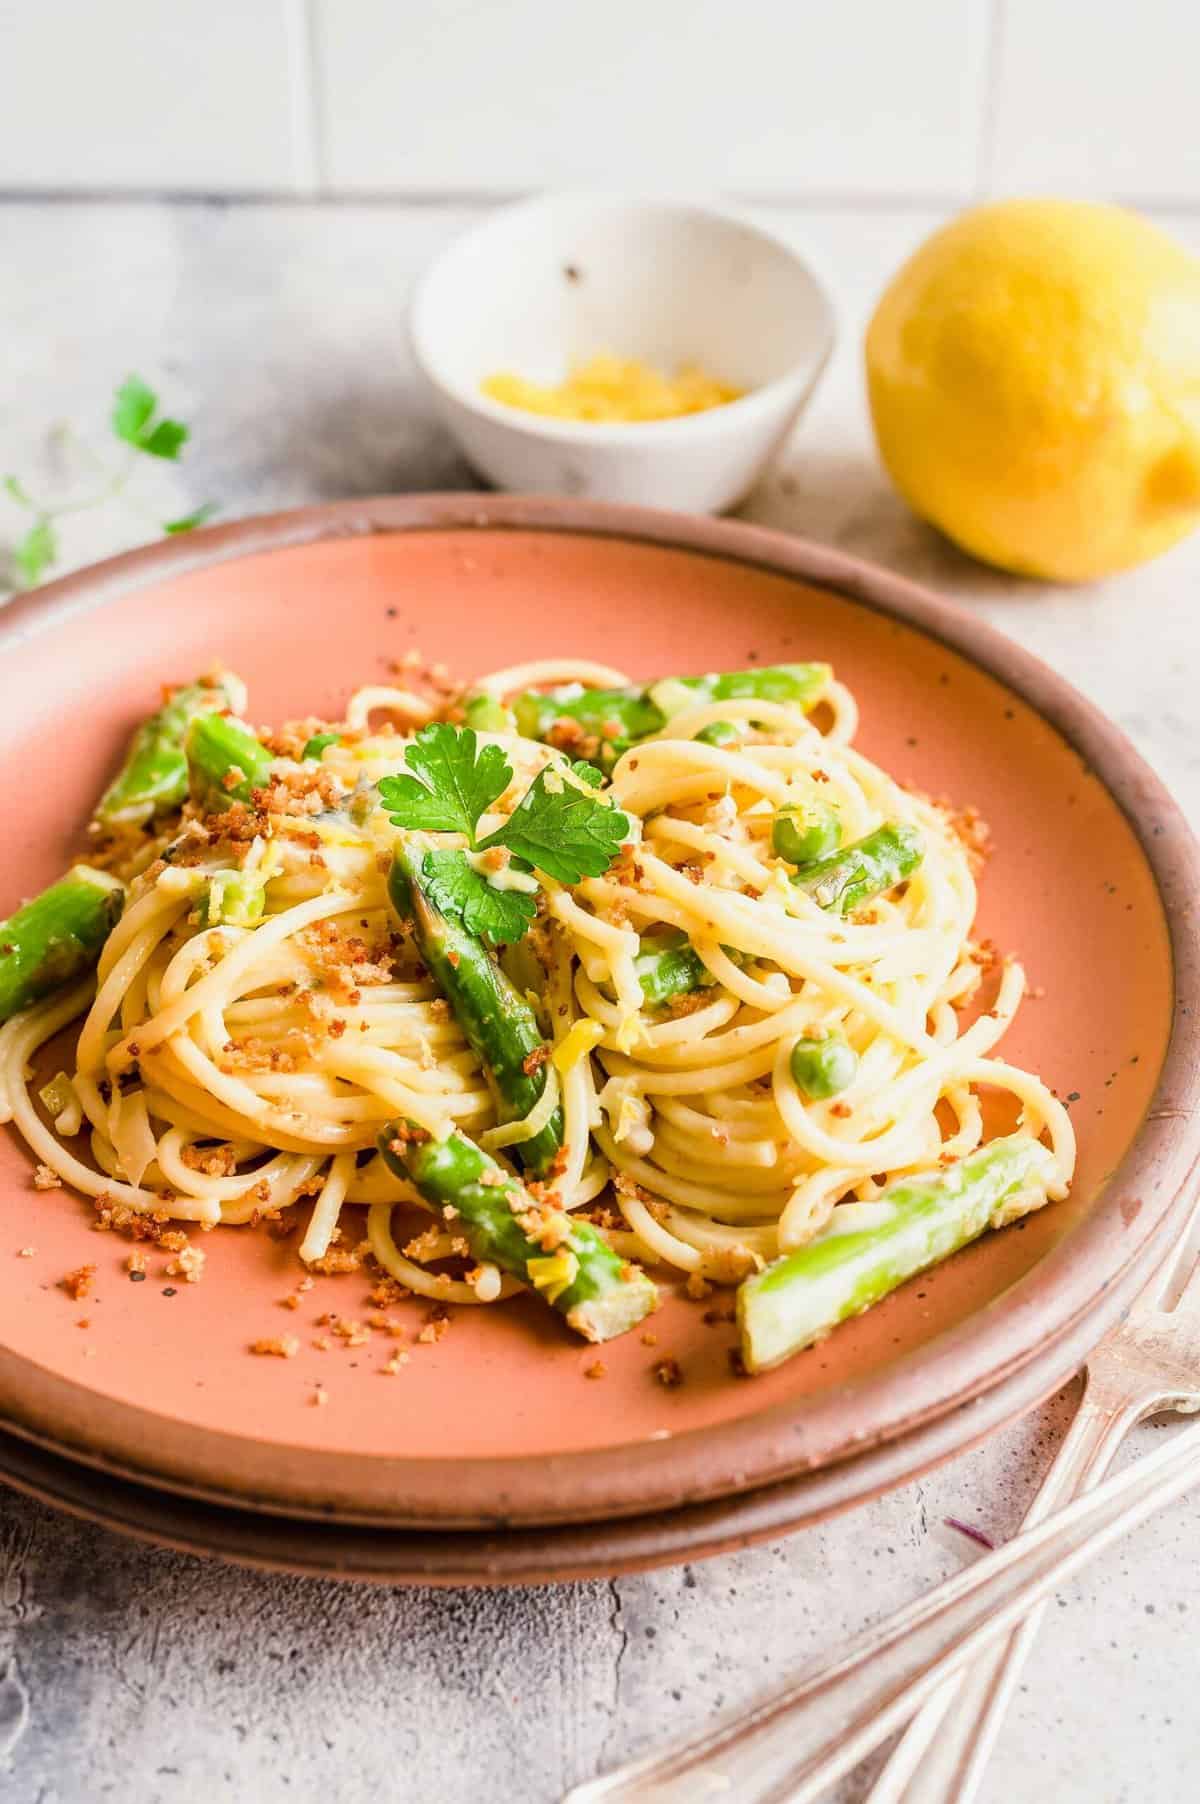 Asparagus and lemon pasta on plate with lemon and bowl of zest in background